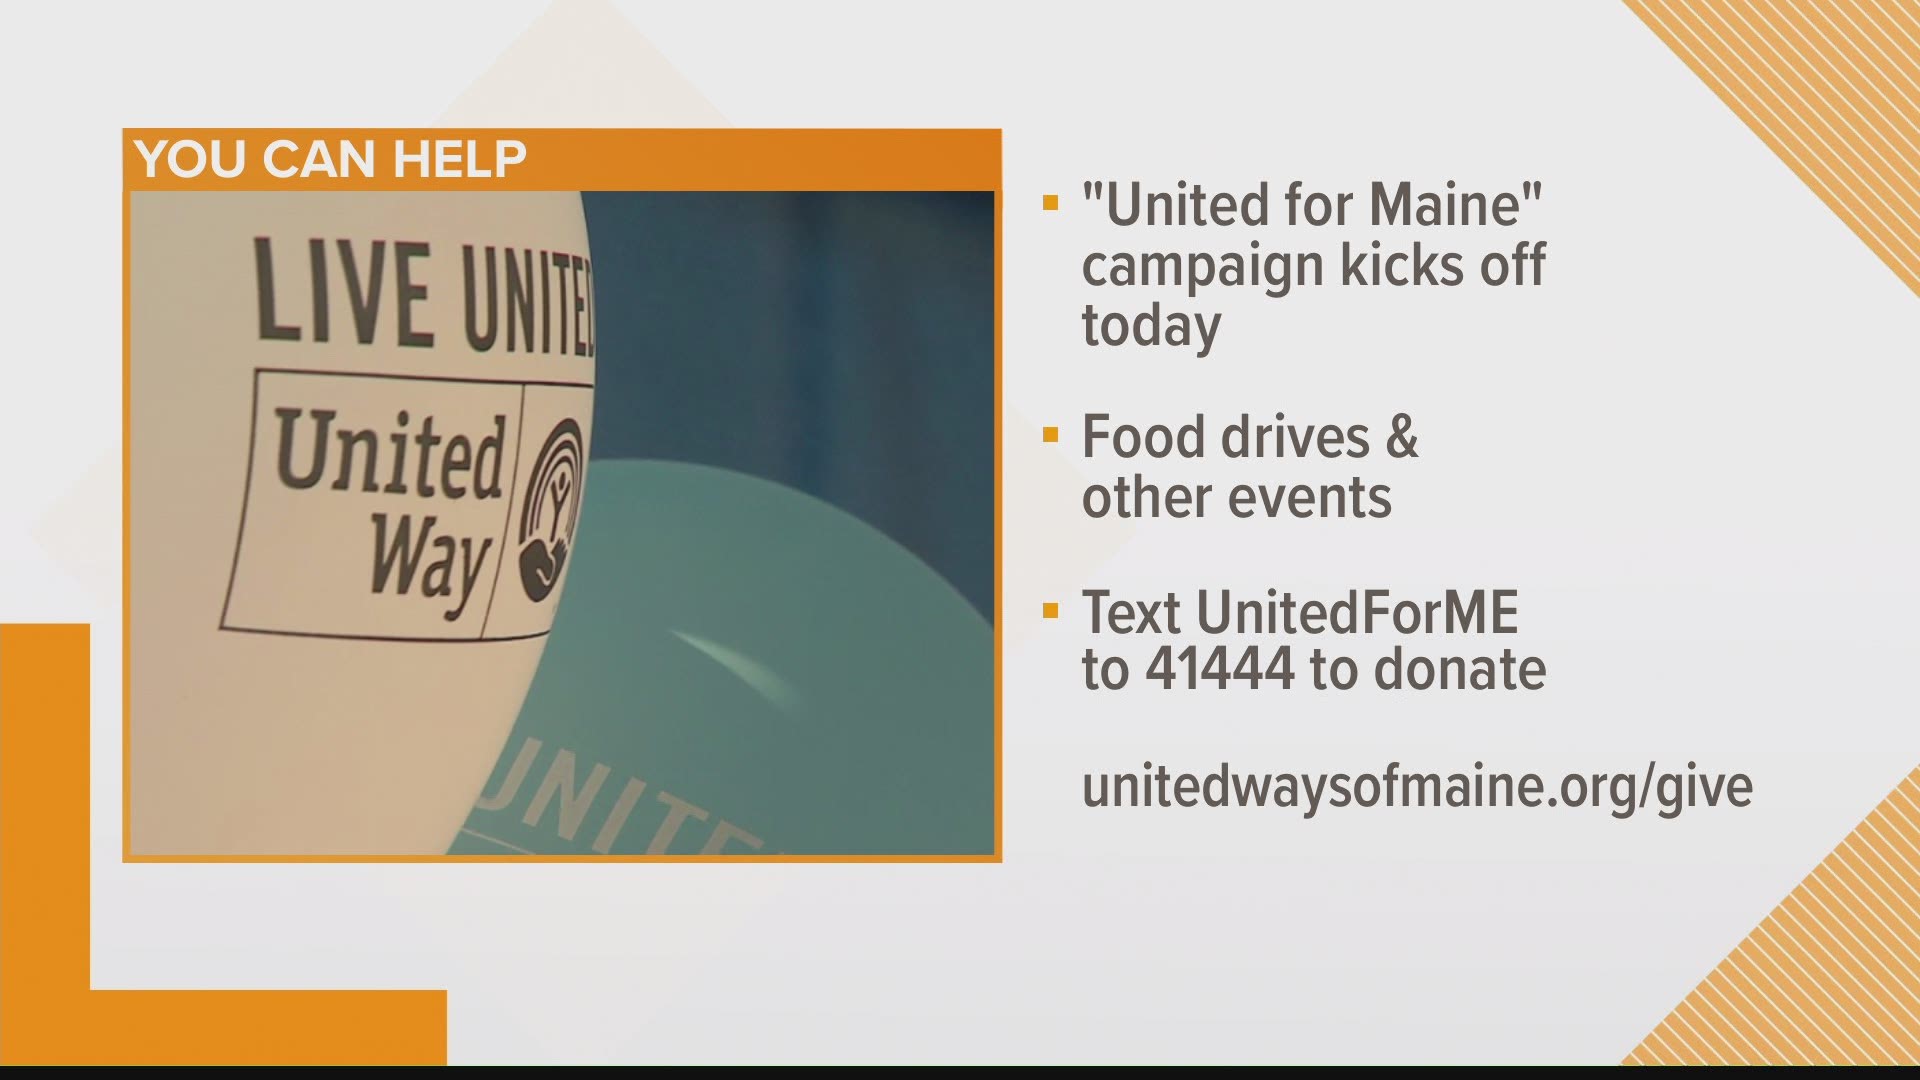 All nine United Way chapters in Maine are holding food drives and other events this week